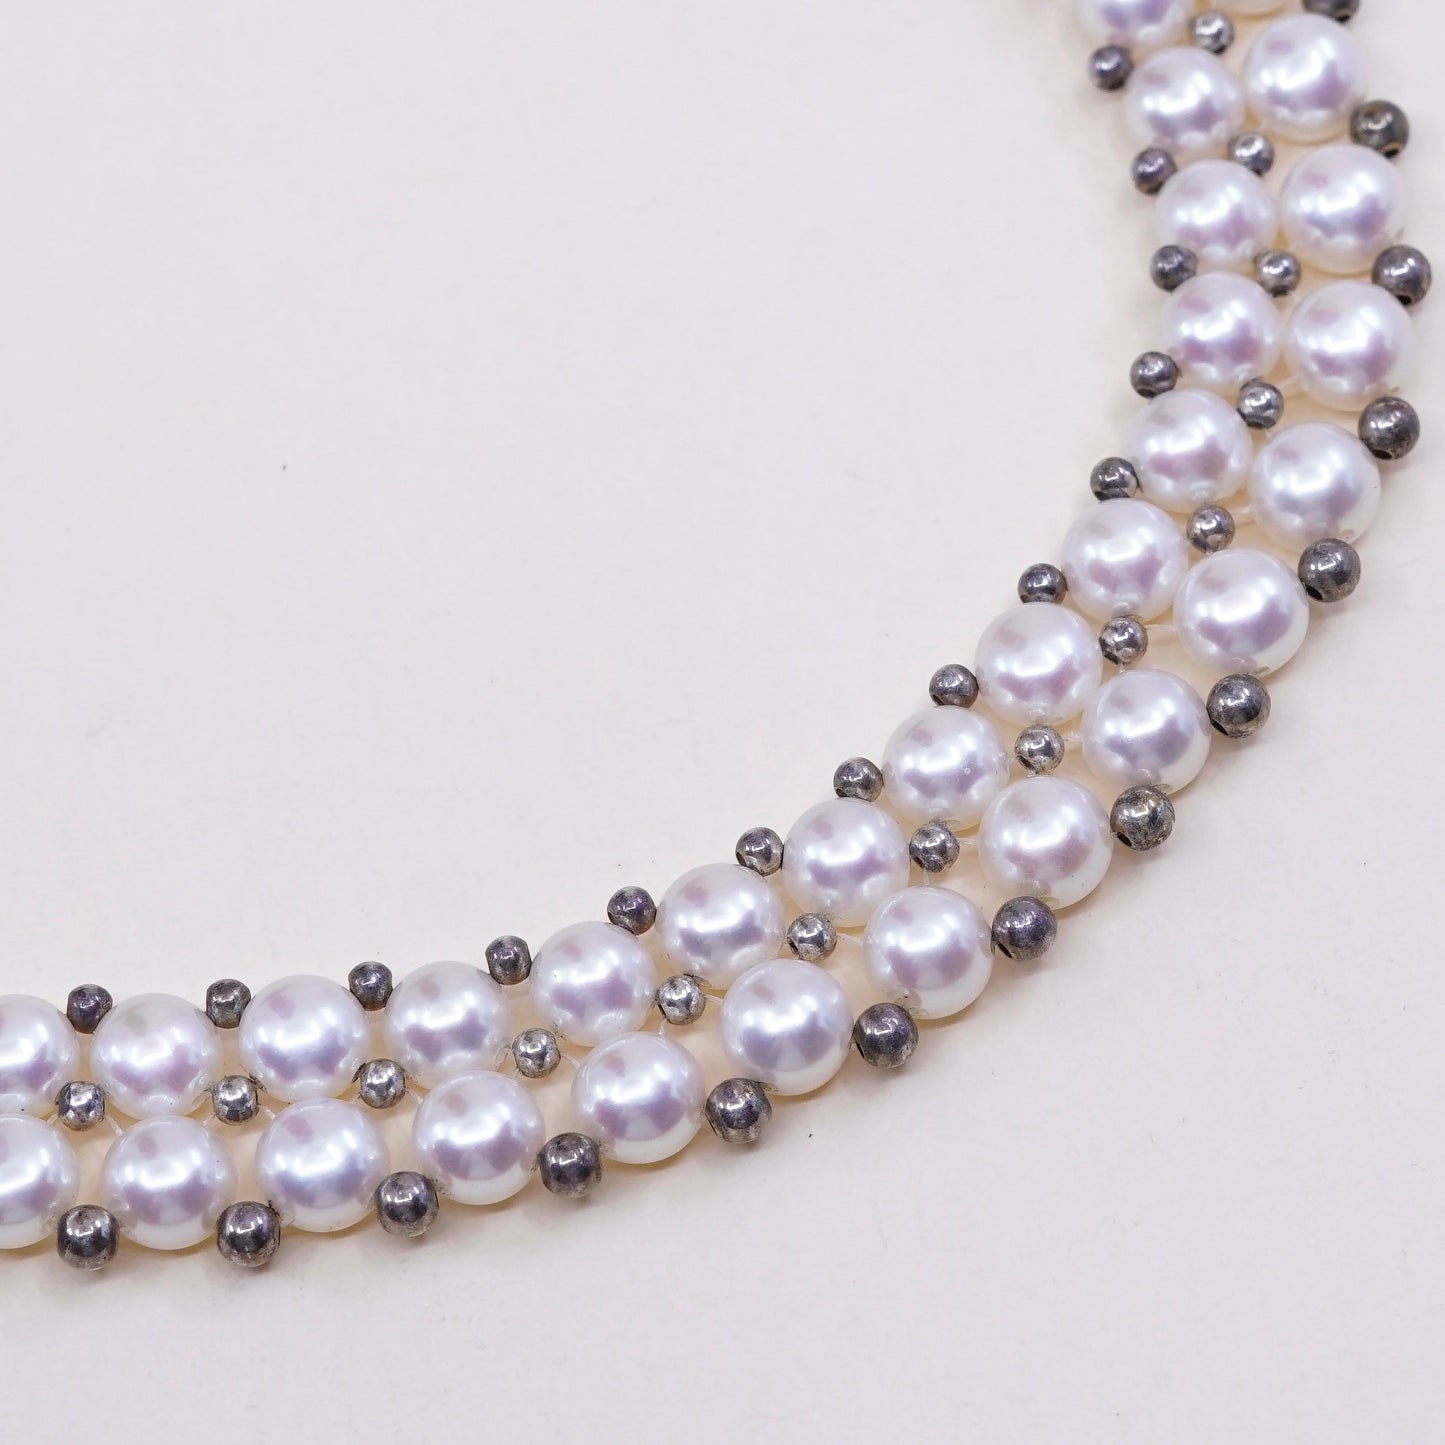 14+4” Vintage sterling 925 silver white freshwater pearl beads necklace chain